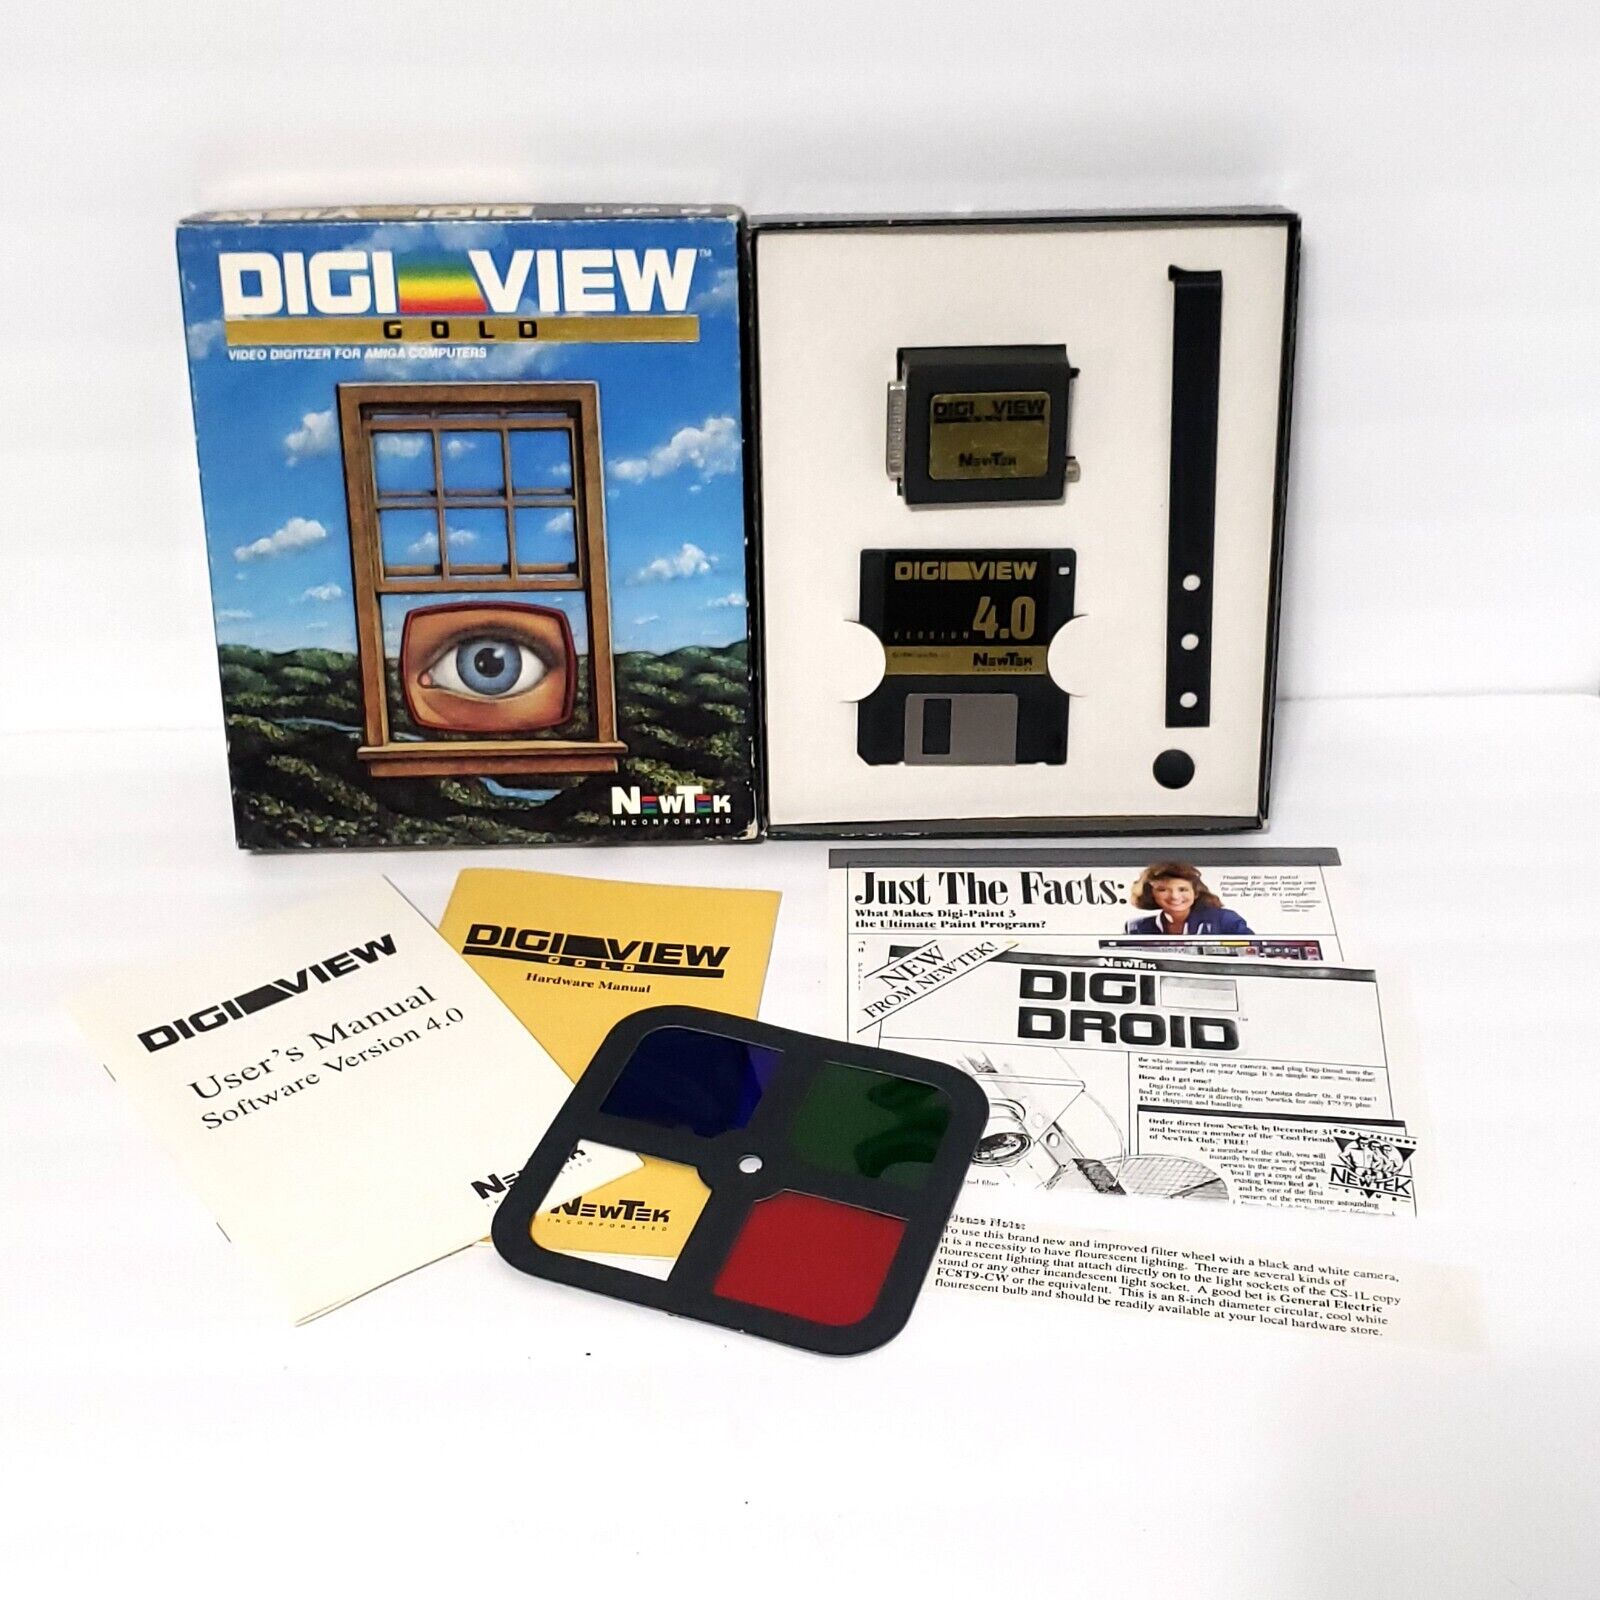 Digi View Gold NewTek Color Digitizer with Software for Commodore Amiga AS IS